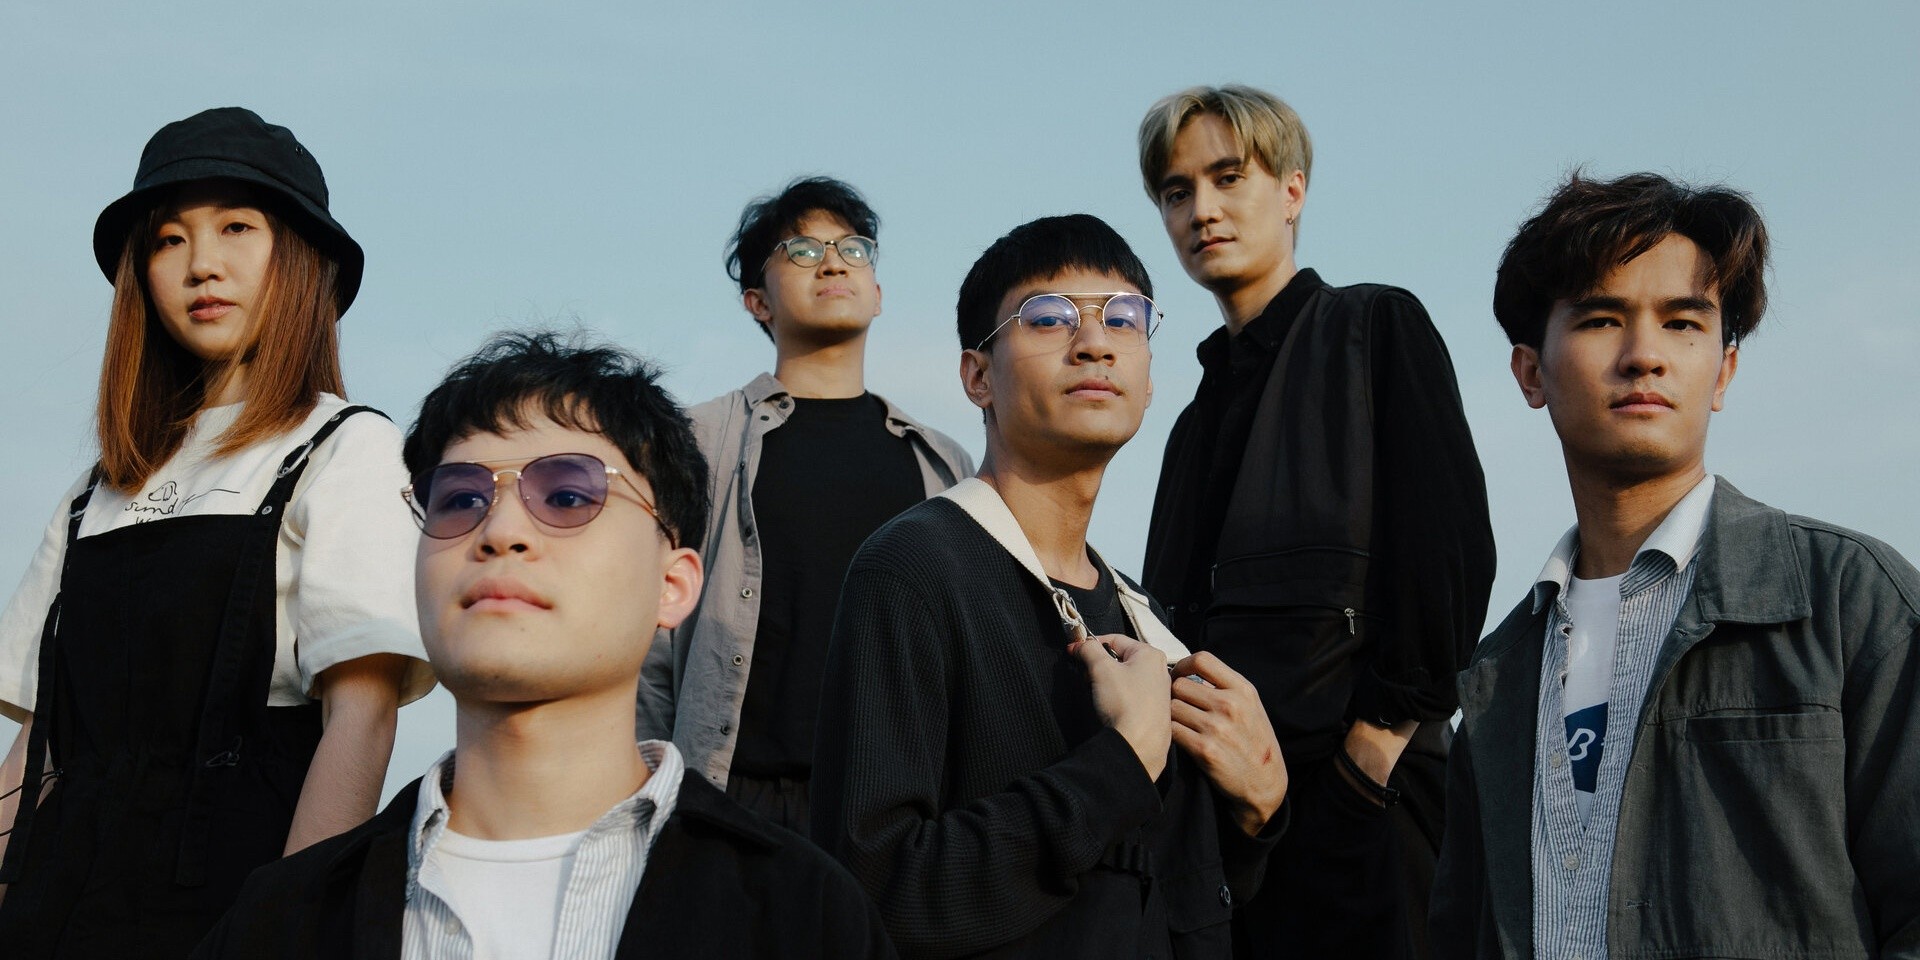 Introducing: Thai indie band loserpop on having fun and making "stupid love songs"